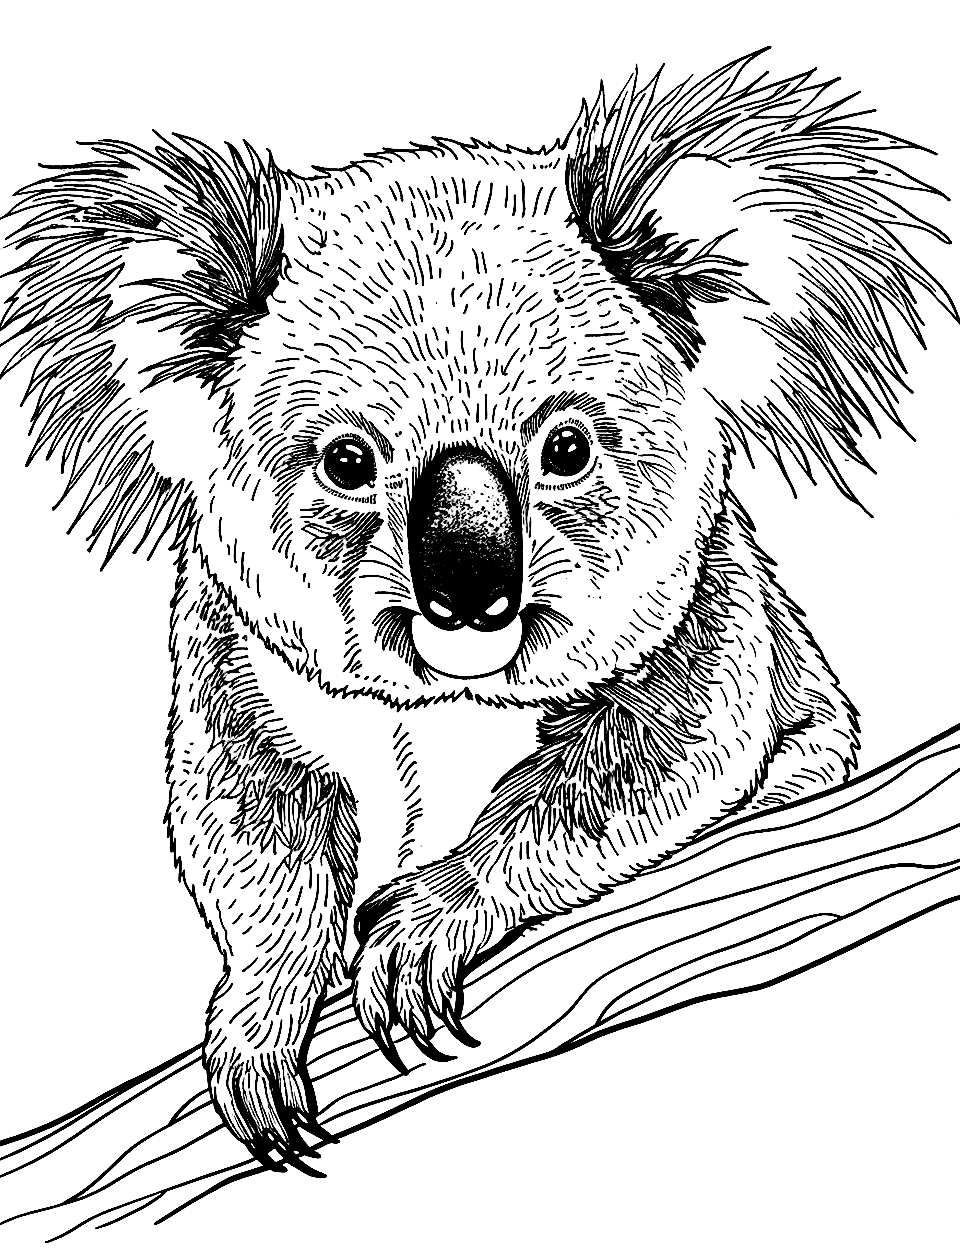 Realistic Koala Portrait Coloring Page - A detailed drawing of a koala’s face, focusing on its unique fur texture and gentle eyes.